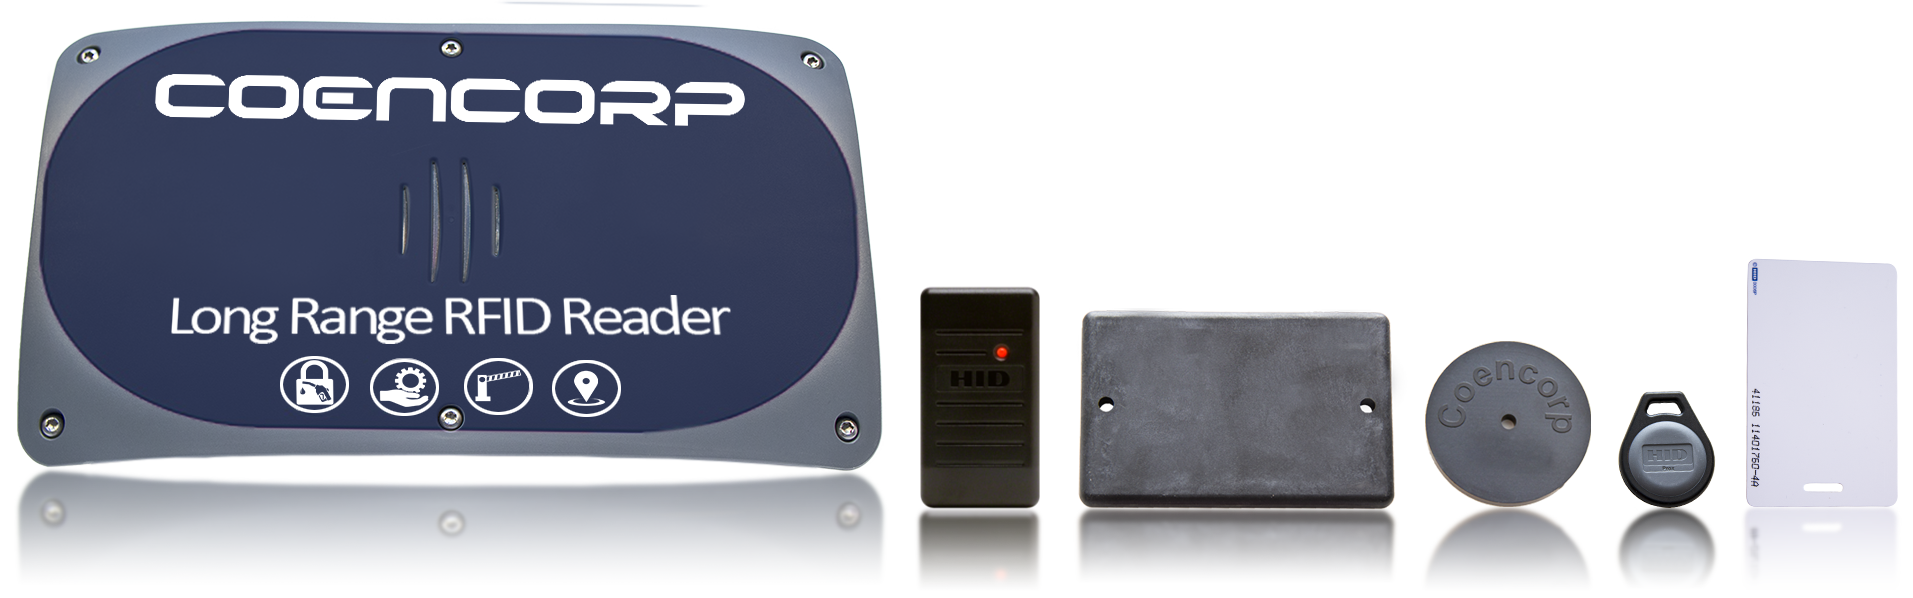 Coencorp's long range RFID GPS telematic hardware peripherals for integrated fleet management software